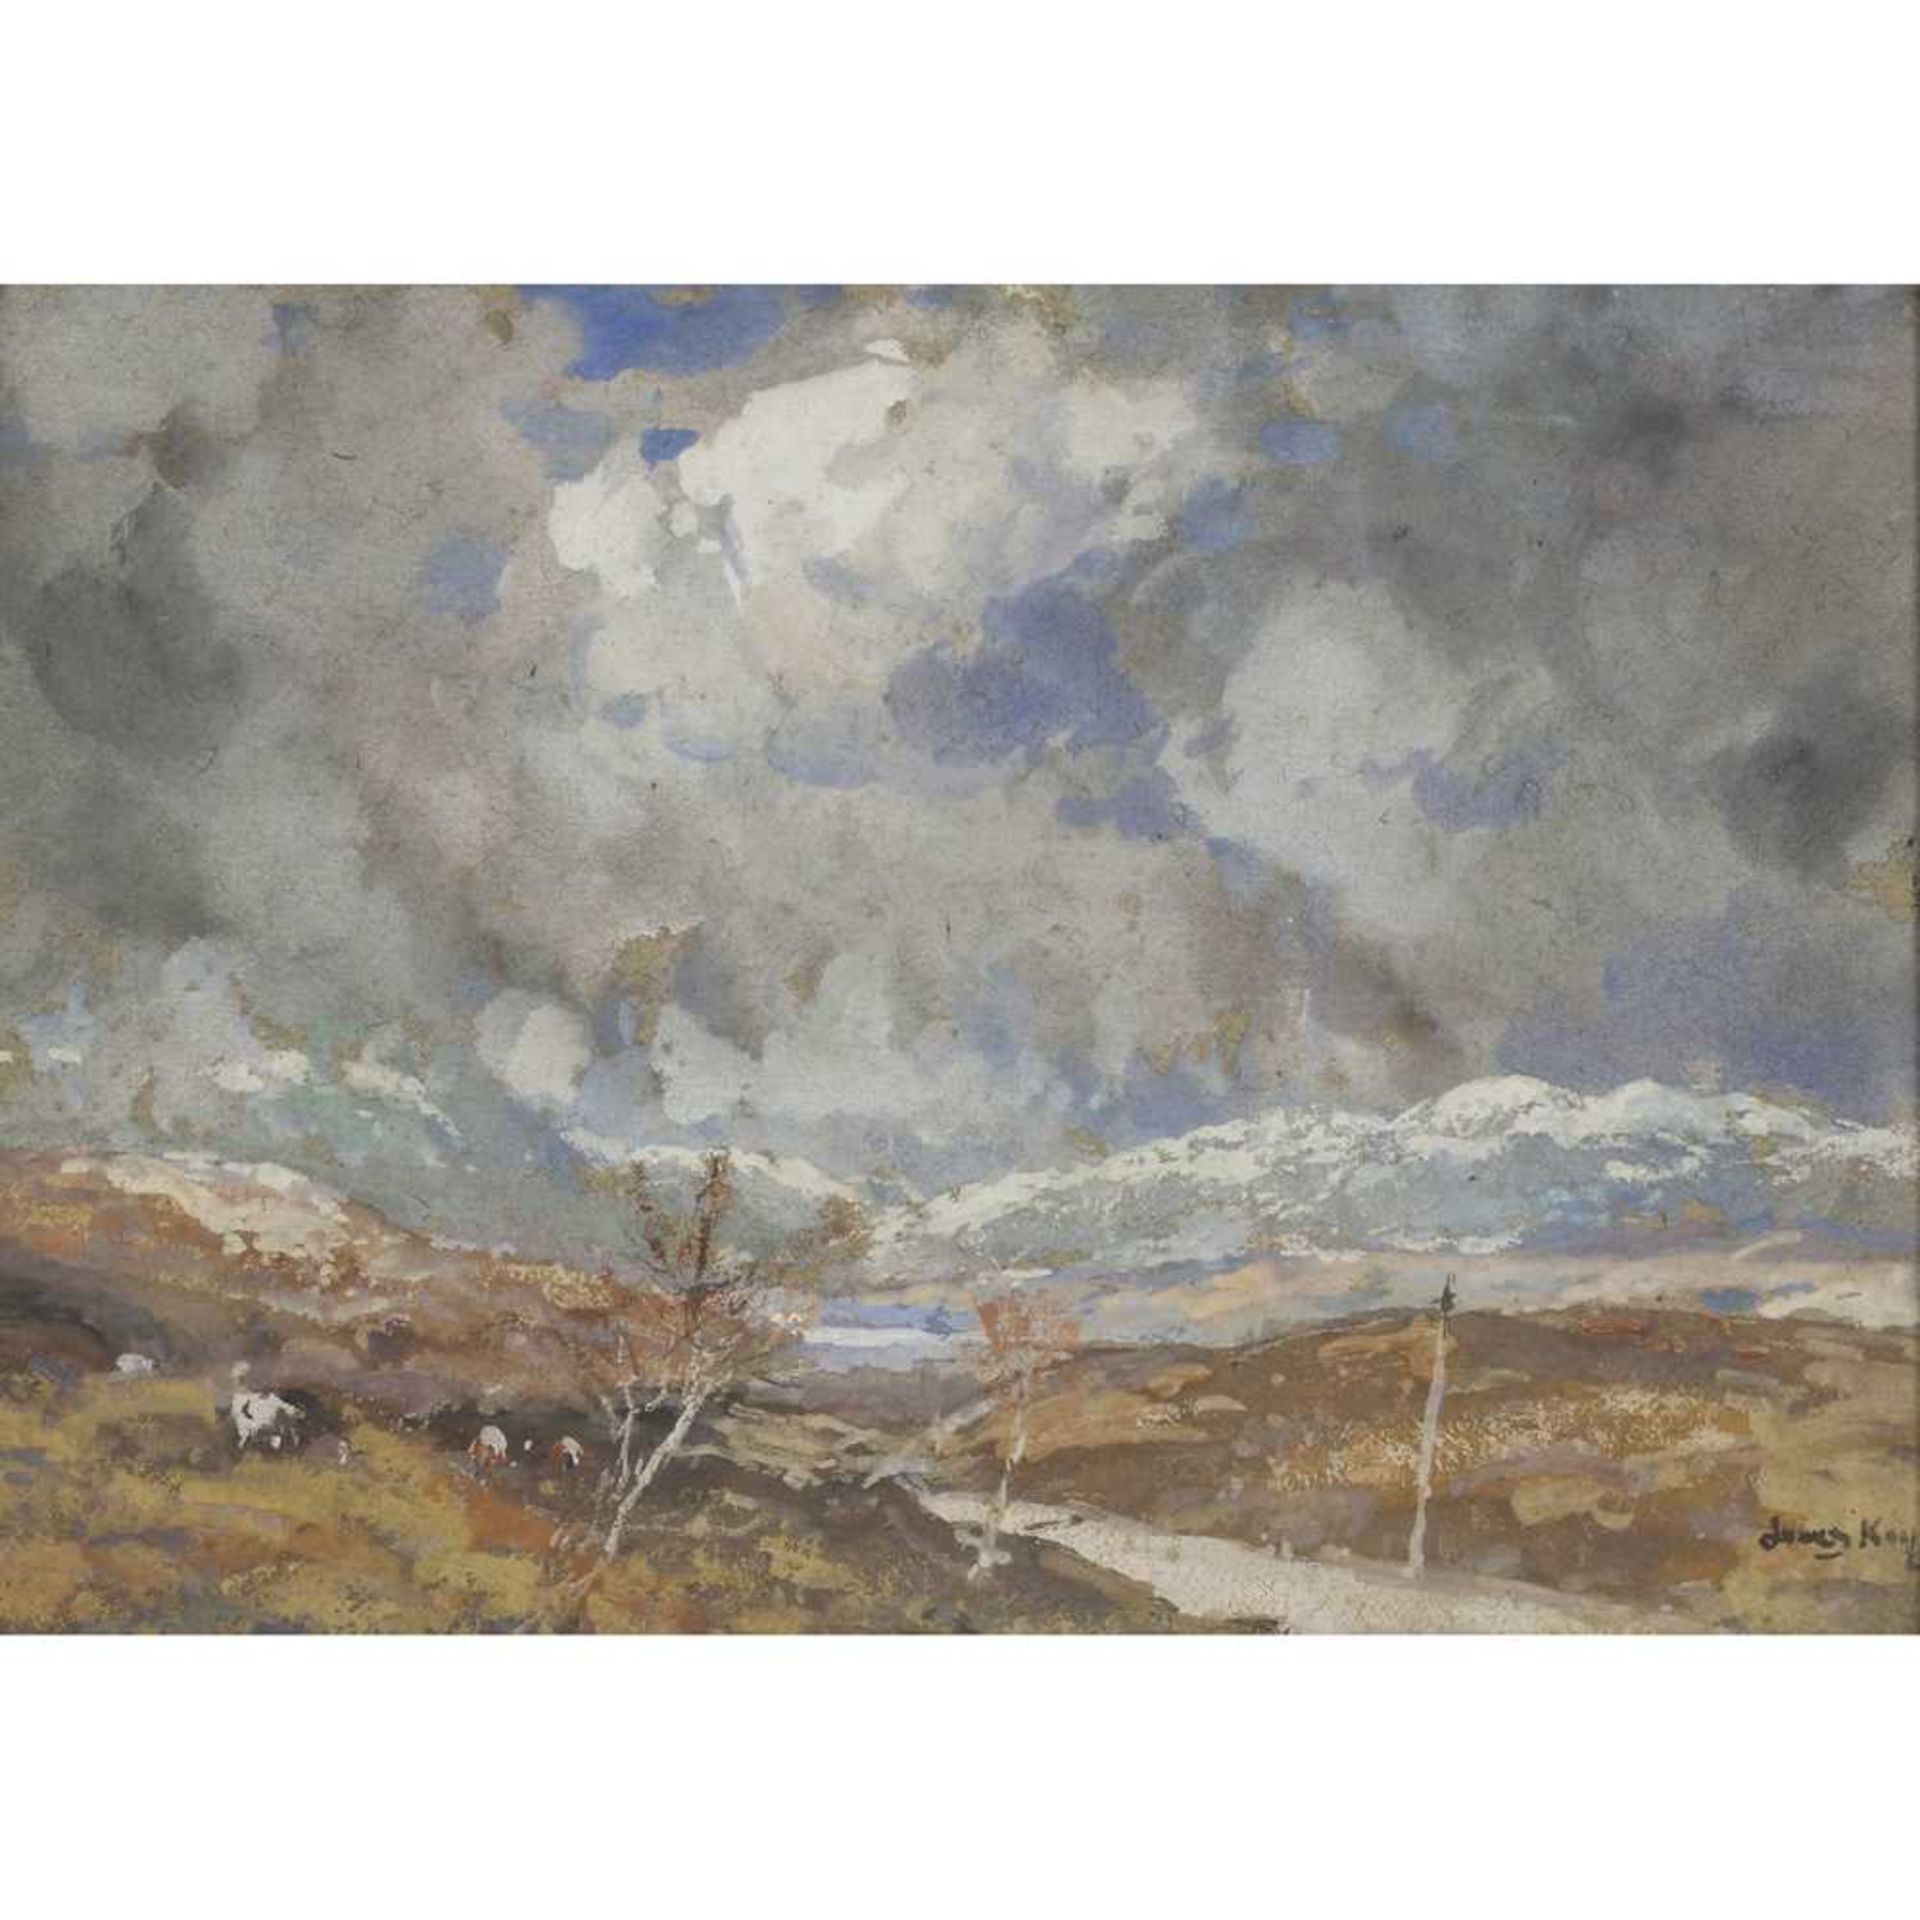 JAMES KAY R.S.A., R.S.W. (SCOTTISH 1858-1942) SNOW ON THE MOORS